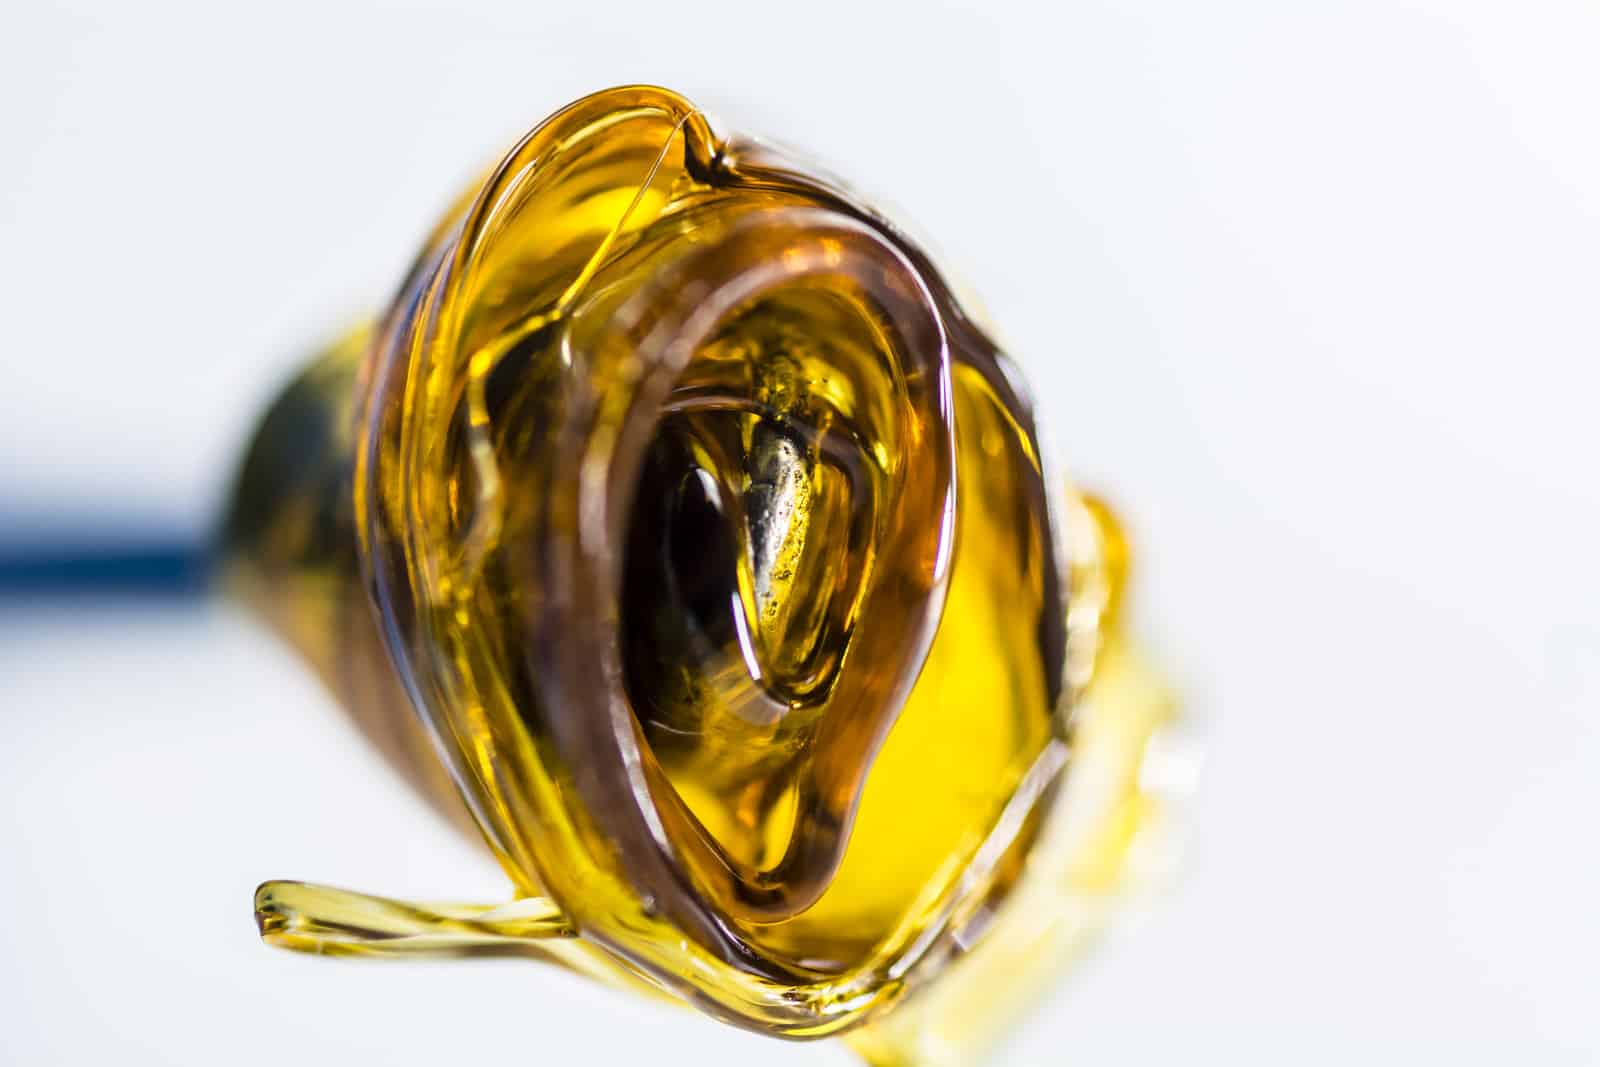 What is 710 Oil Day?